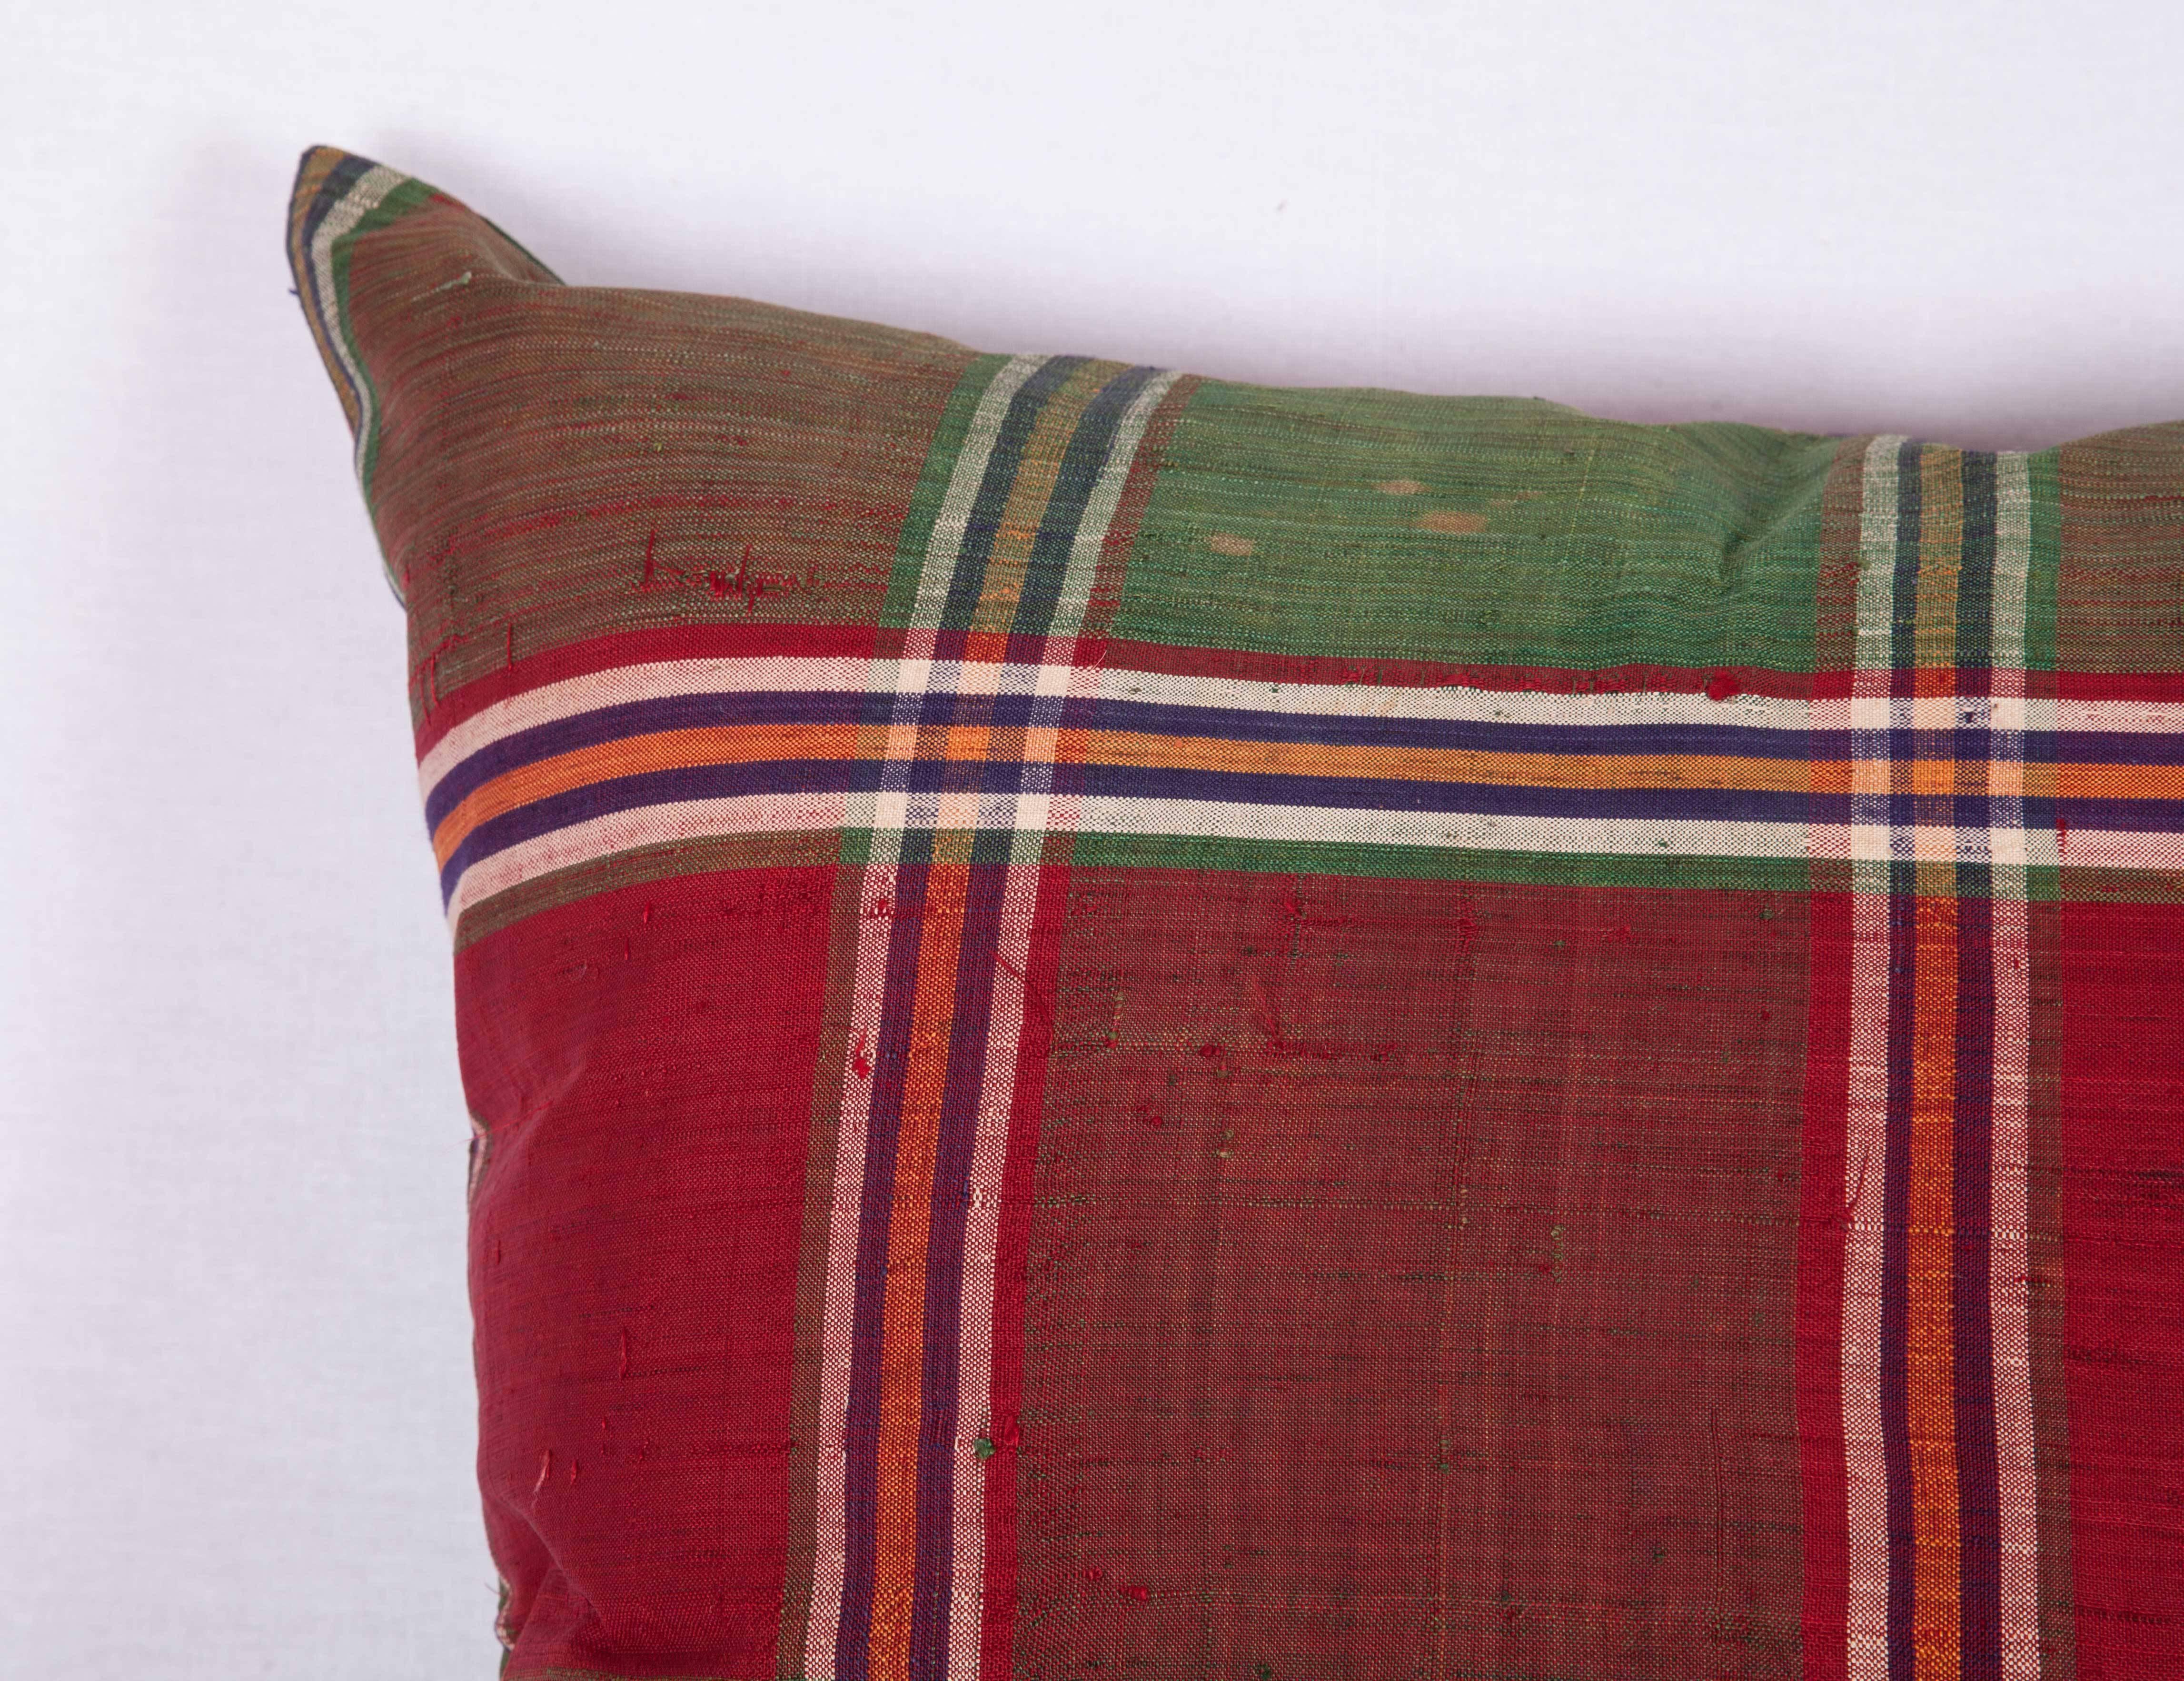 The pillow is made out of mid-20th century, Turkmen silk shawl. It does not come with an insert but it comes with a bag made to the size and out of cotton to accommodate the filling. The backing is made of the same fabric. Please note ' filling is